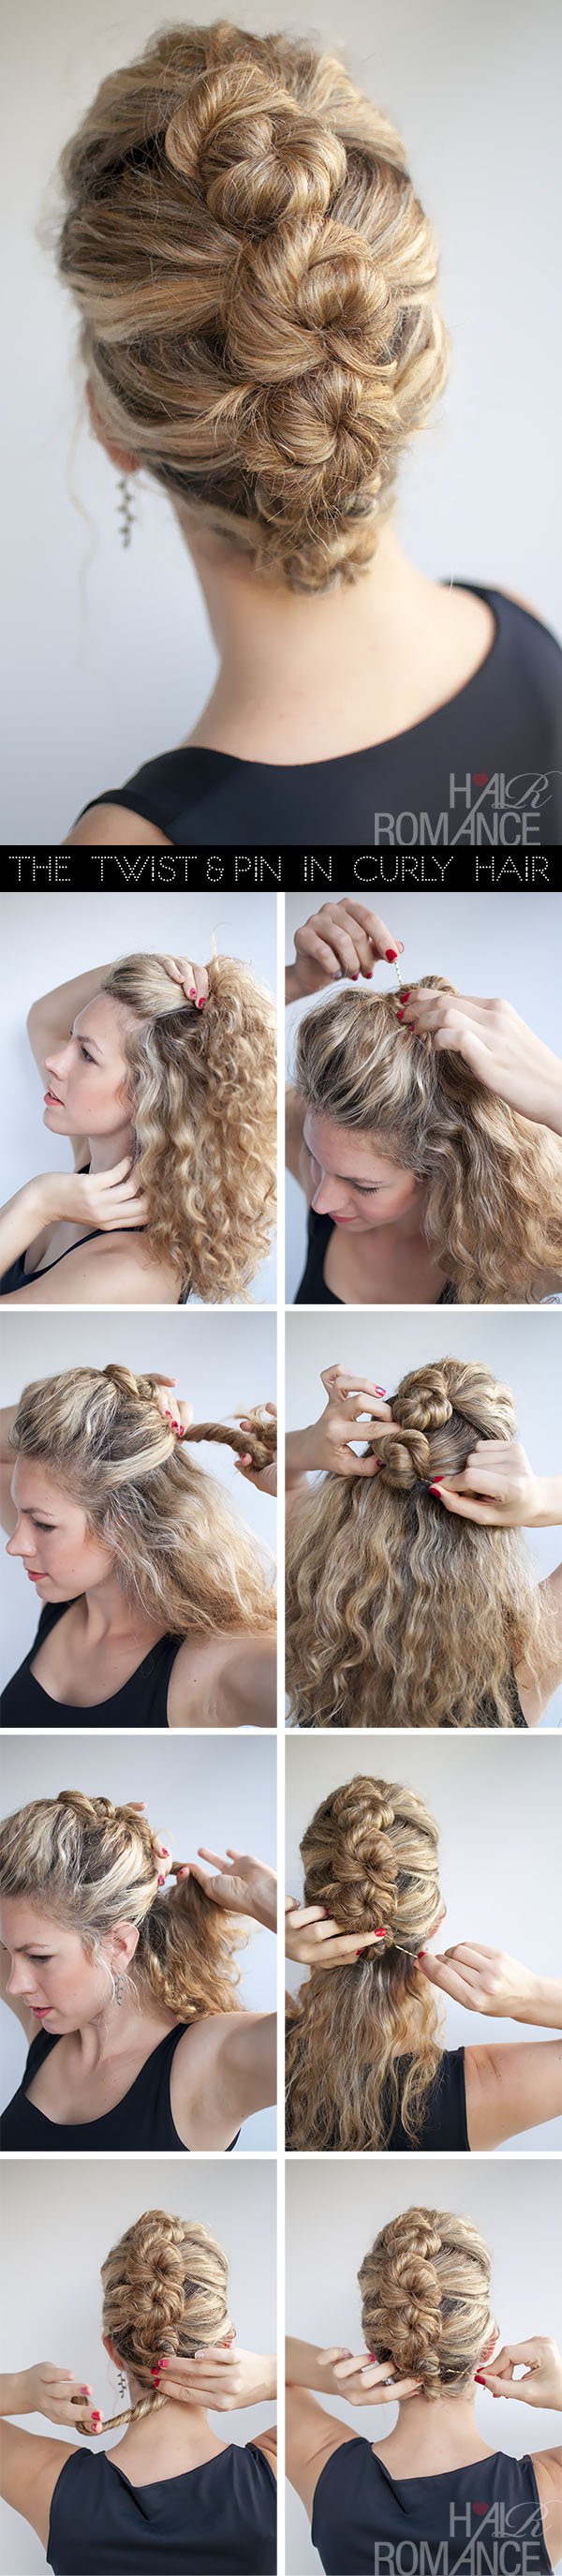 Pinned updo for curly hair